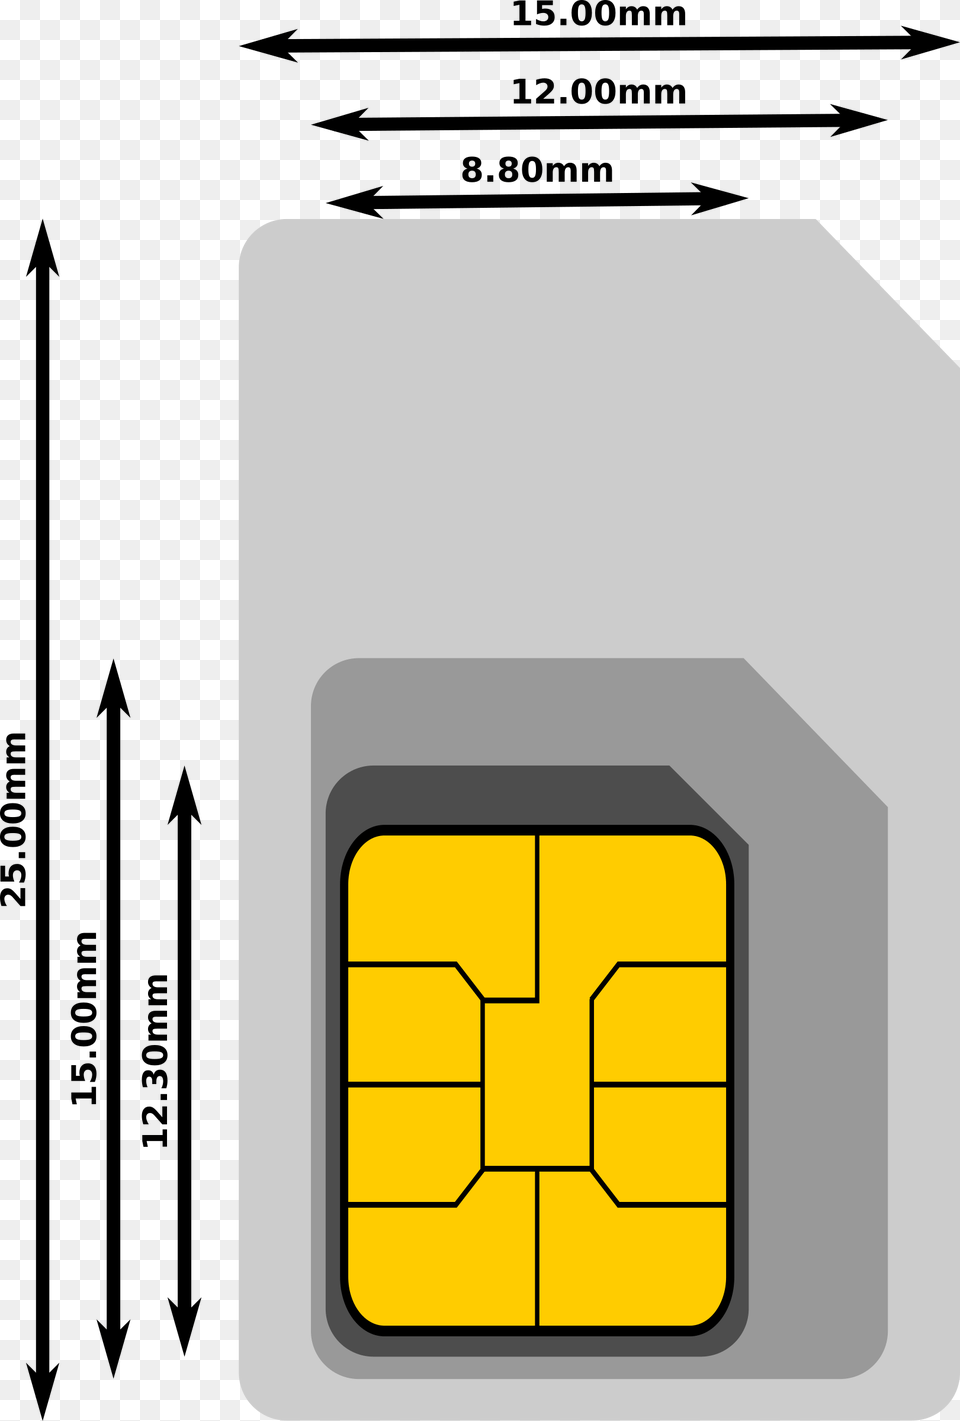 Cellular Sim Card Estimated Dimensions Dimensions Of A Sim Card, Computer Hardware, Electronics, Hardware, Screen Free Png Download